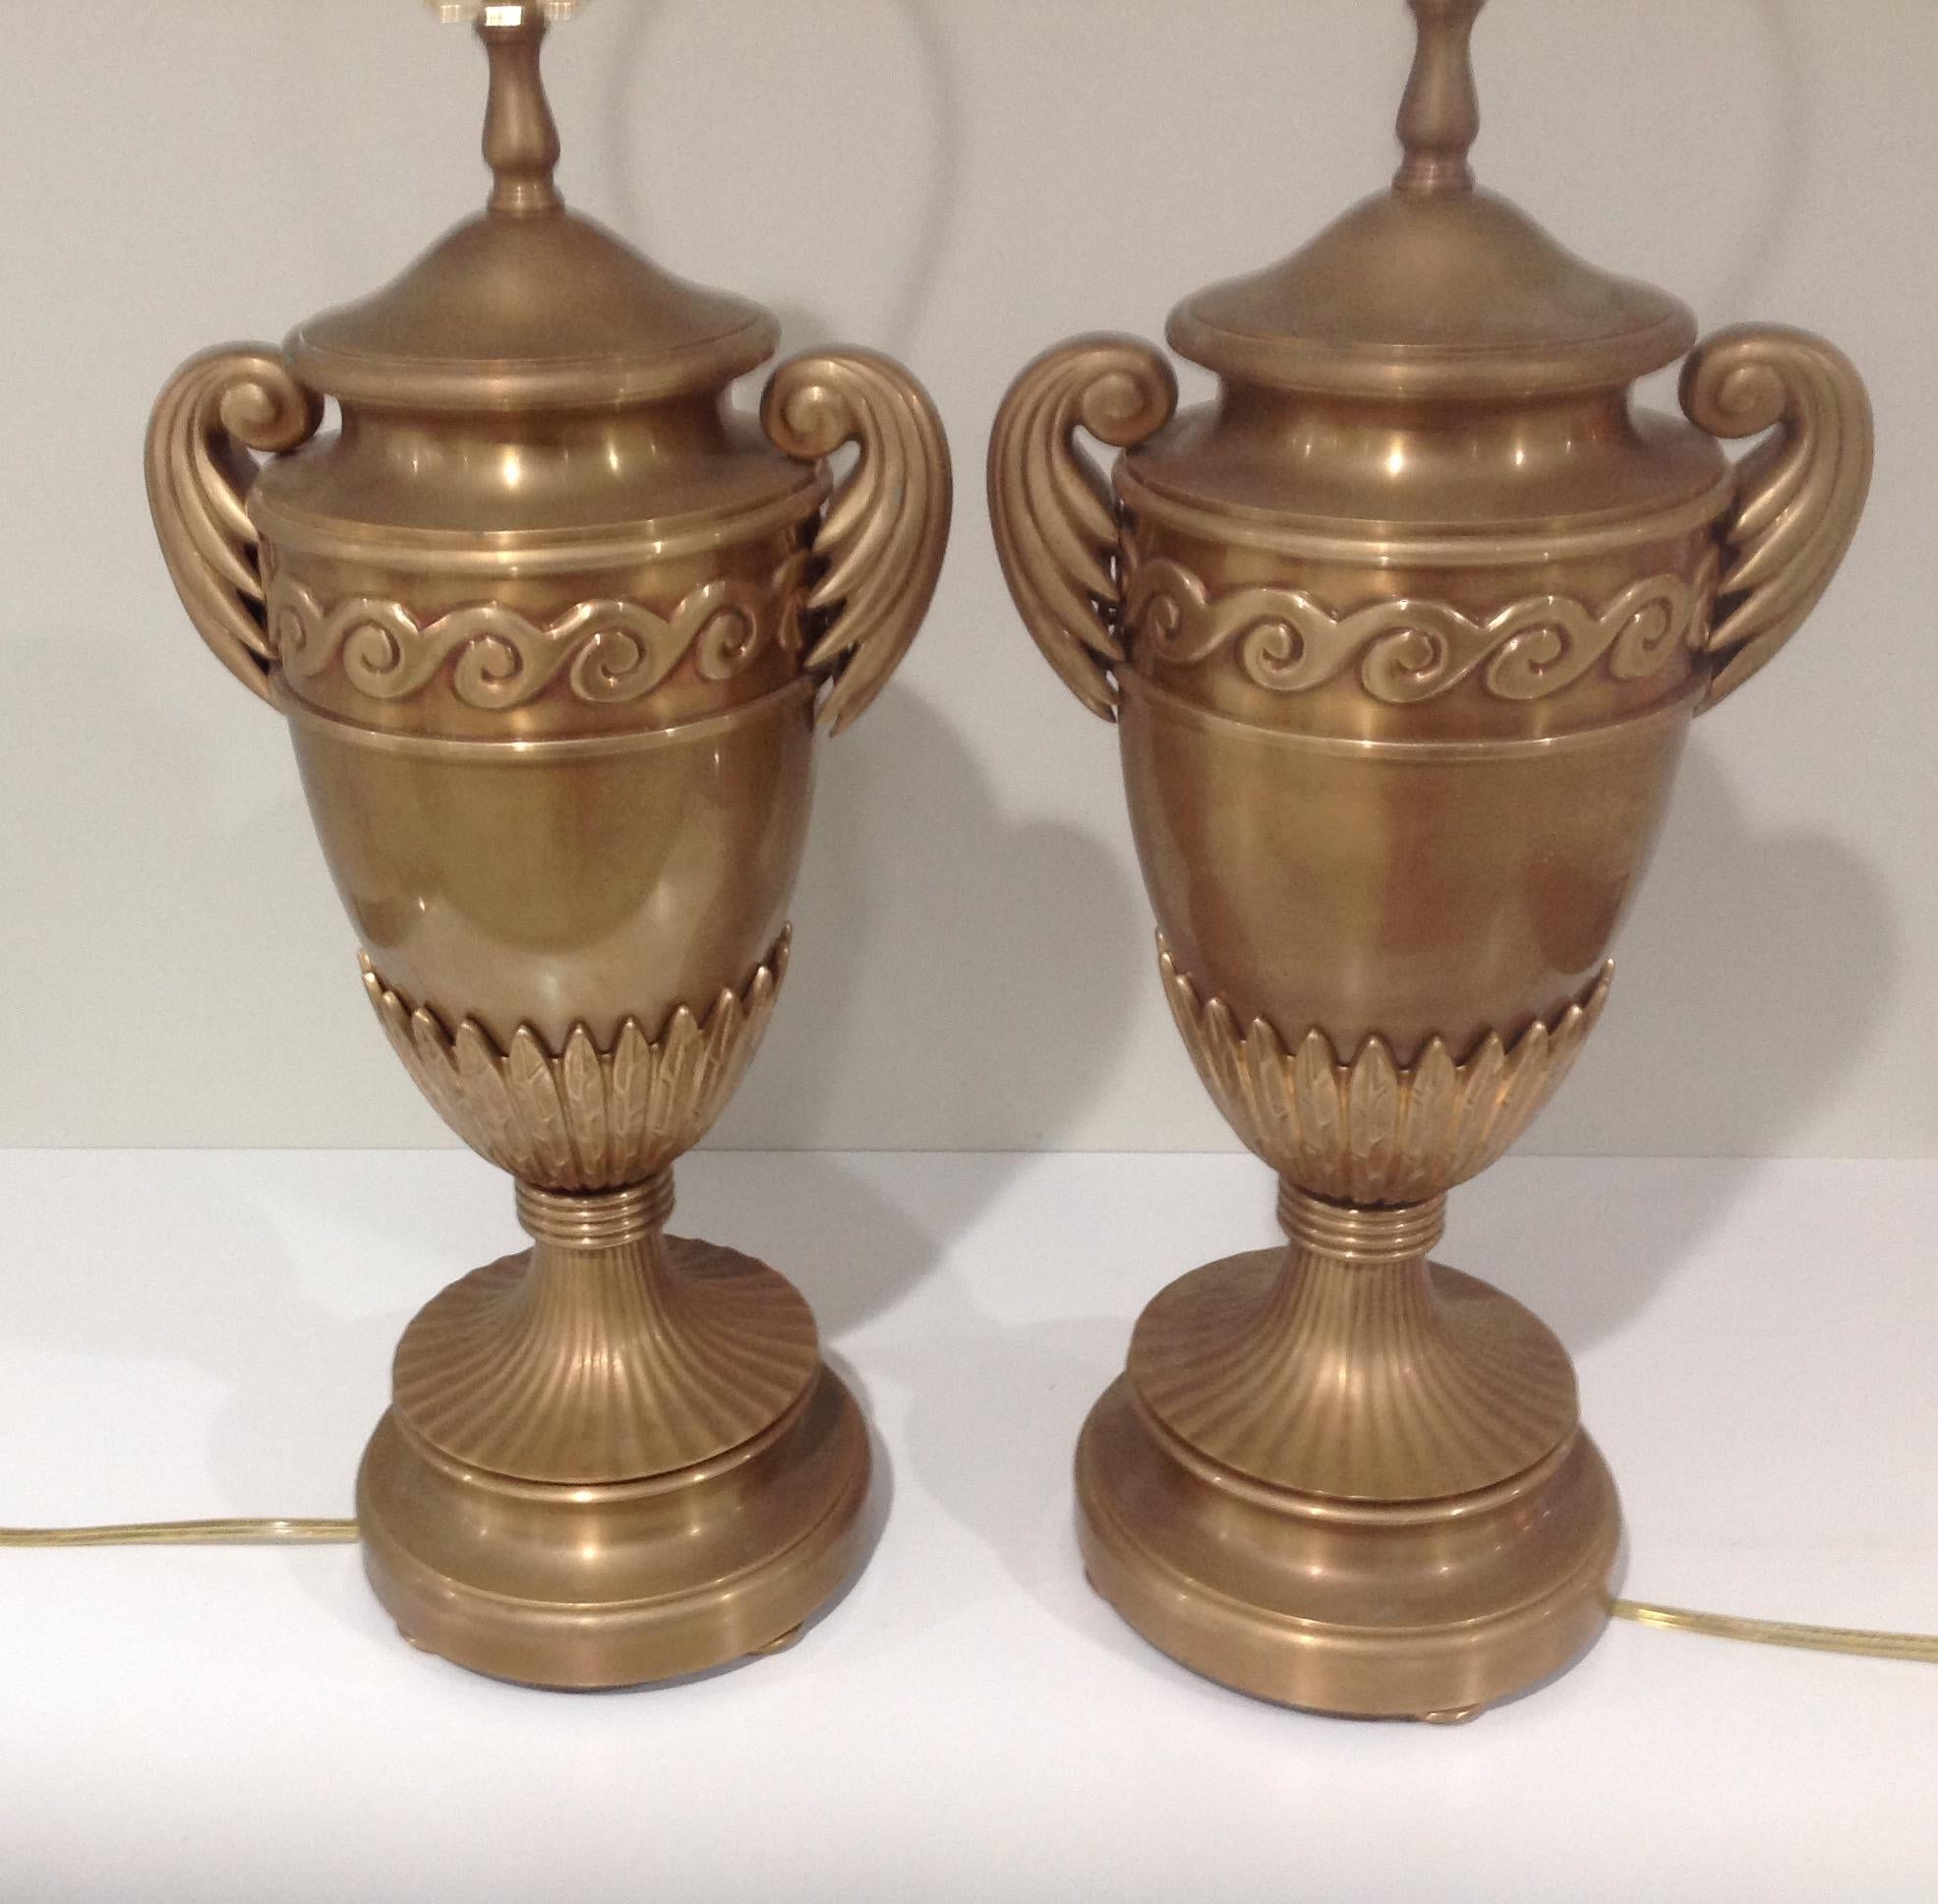 Large and very decorative pair of Chapman urn form lamps. Lamps are either brass or bronze. Lamps retain original harps and finials. Circa 1980’s. 

Chapman Manufacturing Company, Inc. is a world renowned leader in the home furnishings industry.